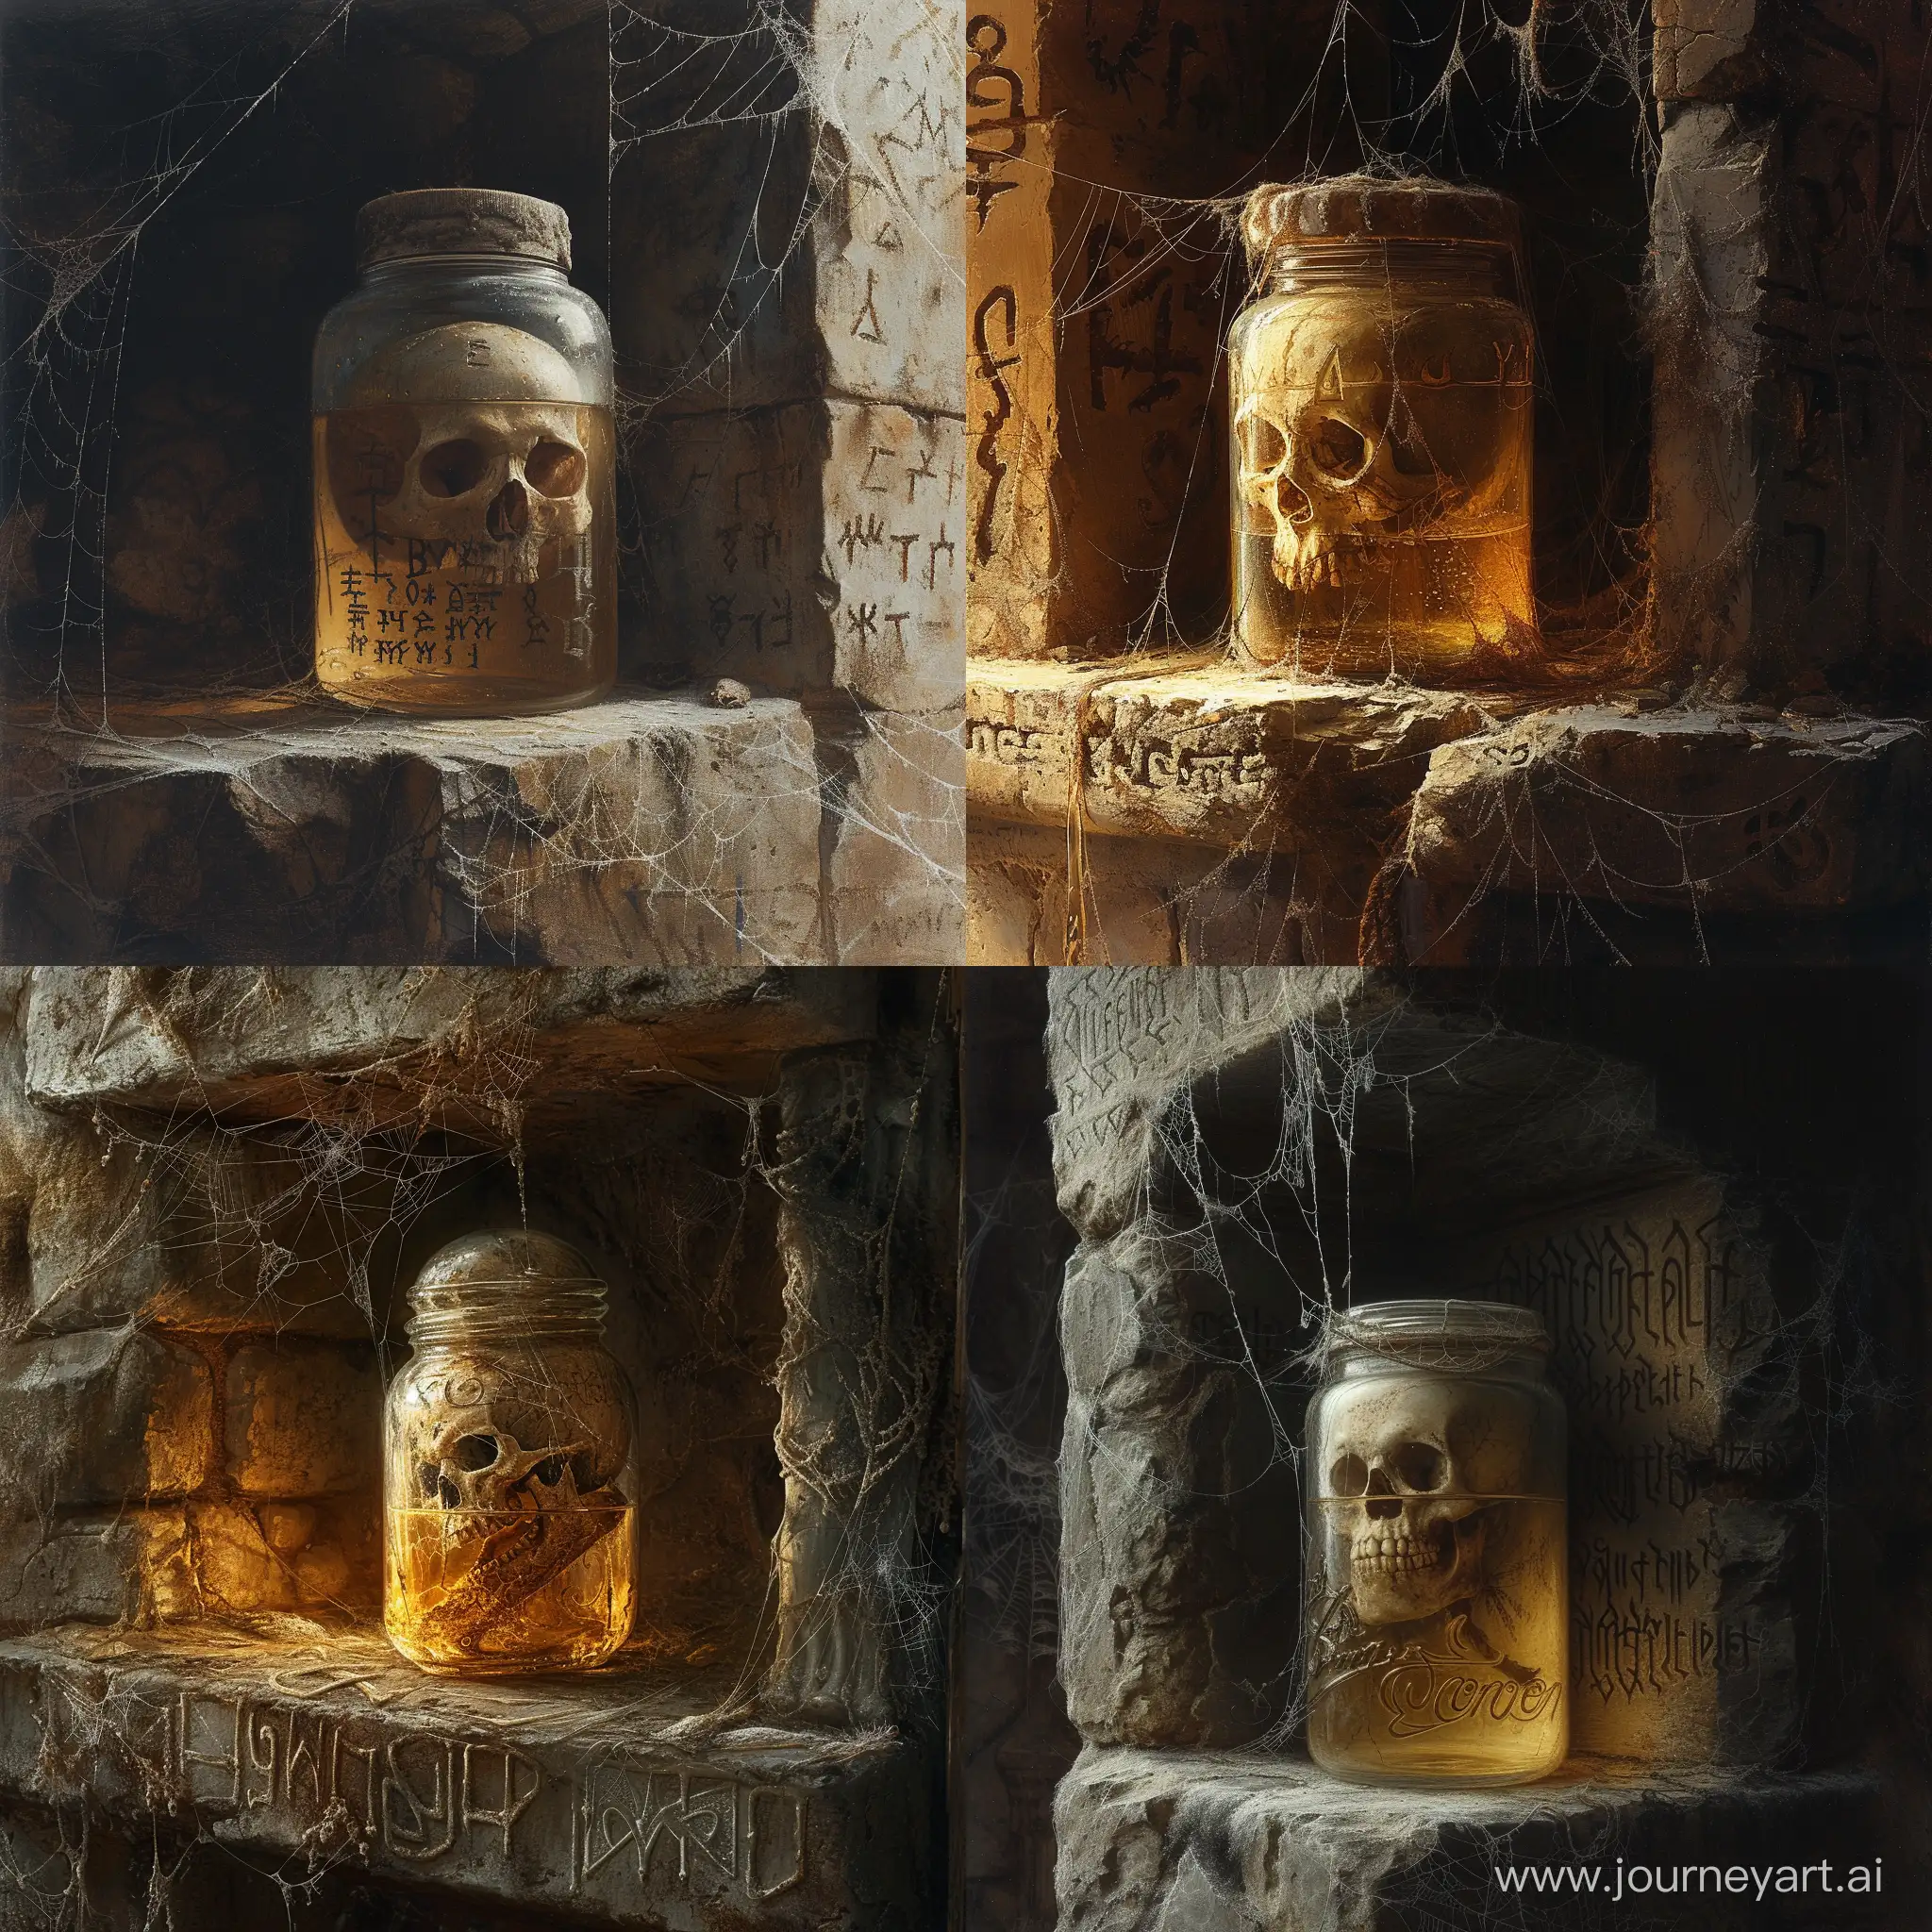 Safeguarding a jar with skull in alcohol,Beksinski grotesque haunting unsettling dark,on ancient On a stone shelf,cobwebs everywhere,runic script,incredible detail,warm light,terrifying.